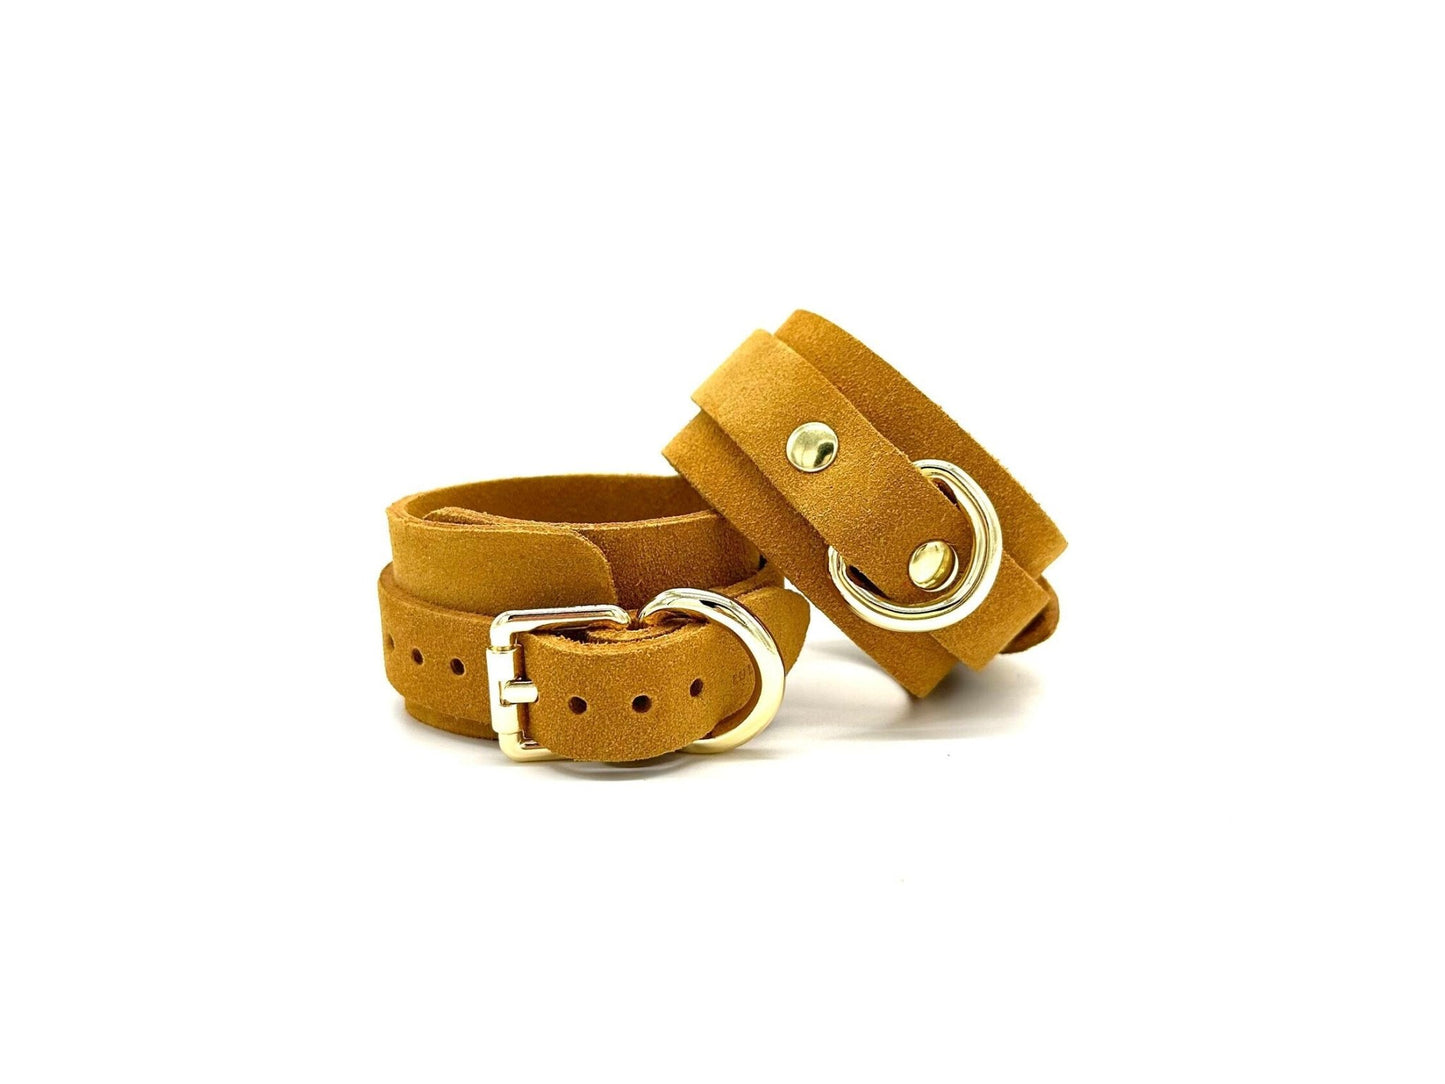 Pair of Italian suede BDSM bondage cuffs made in the USA, showcasing one cuff lying flat and the other placed on top, both embellished with gleaming gold hardware, offering a blend of sophistication and durability for captivating bondage experiences.